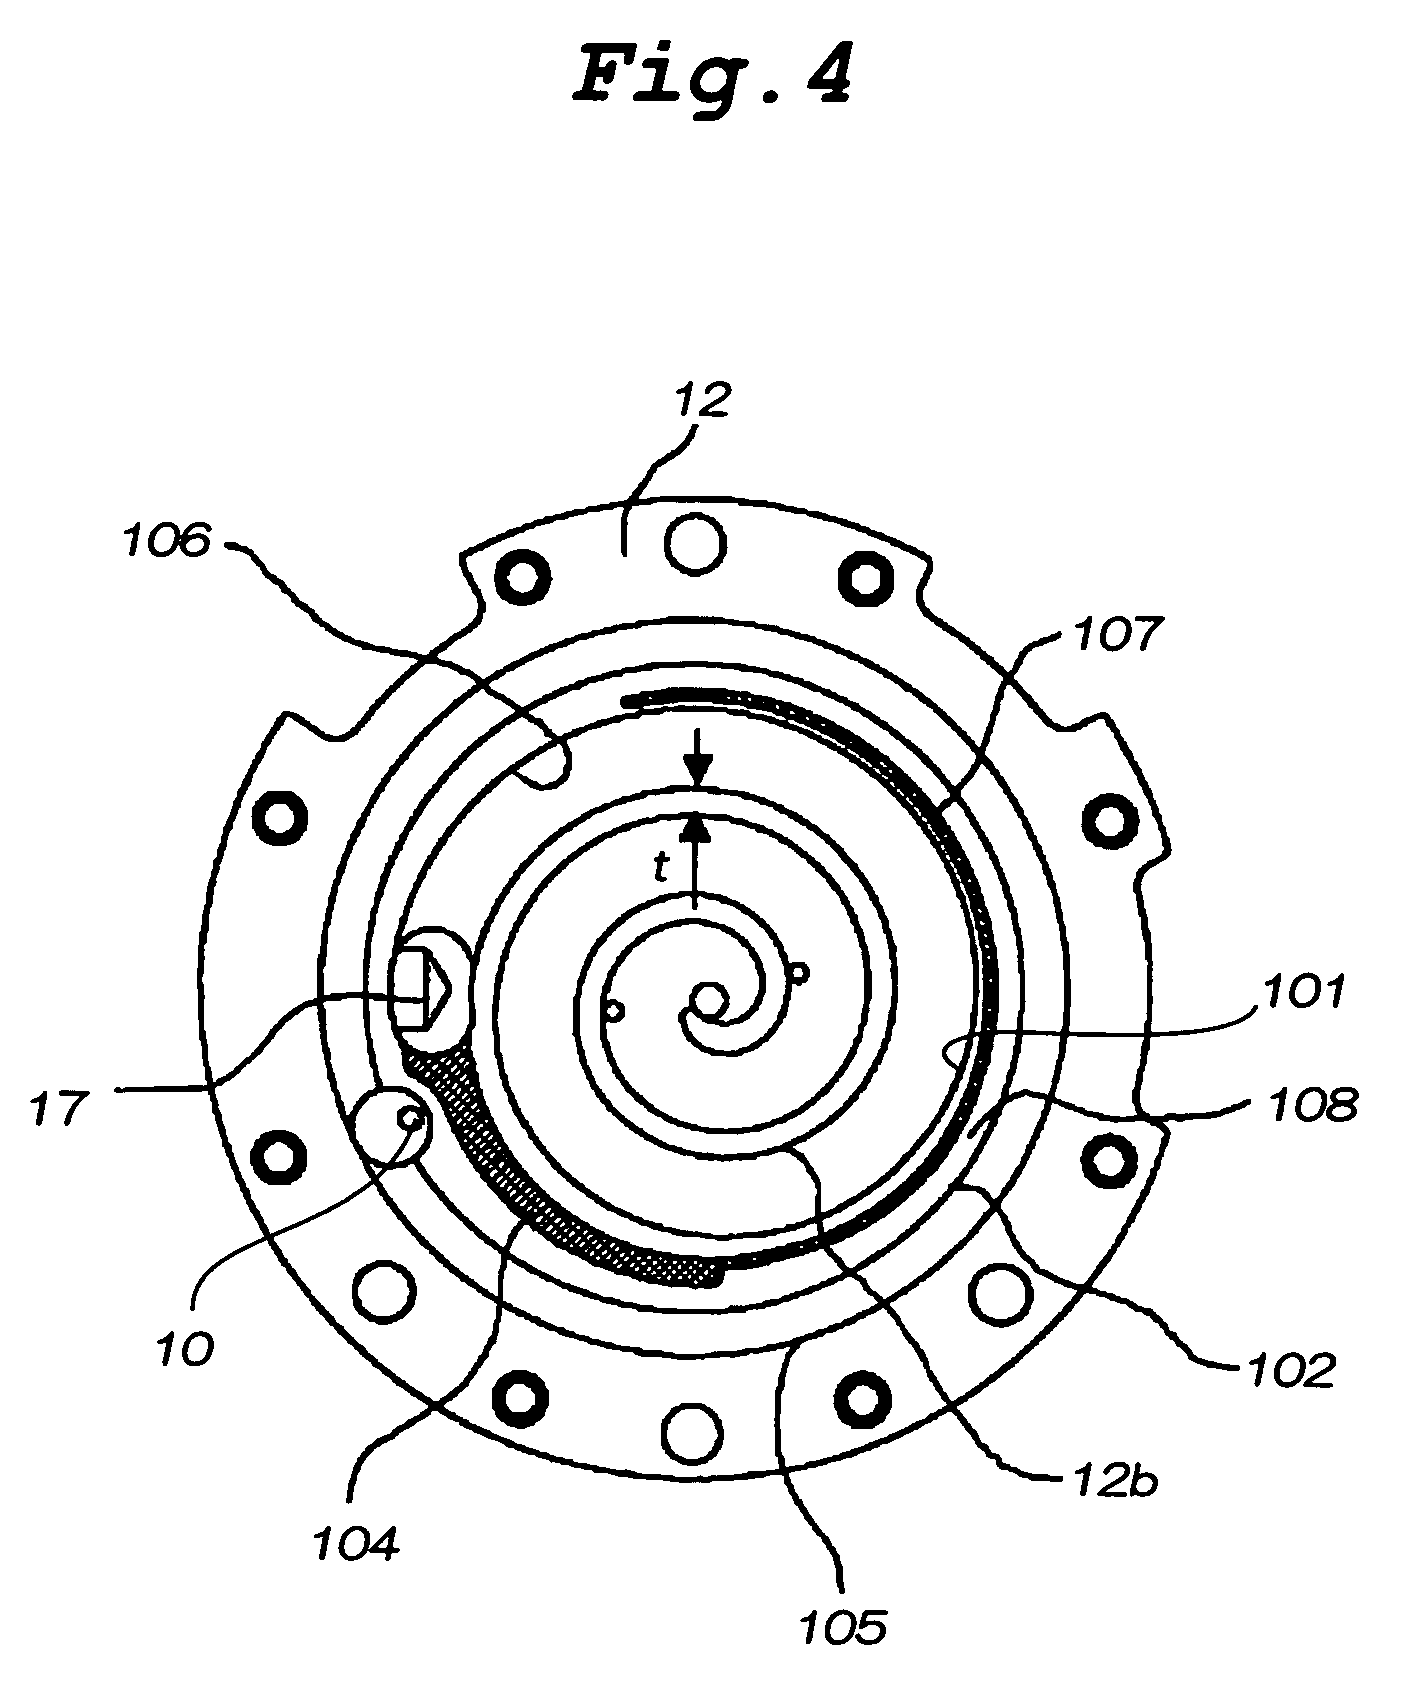 Scroll compressor having an annular recess located outside an annular seal portion and another recess communicating with suction port of fixed scroll